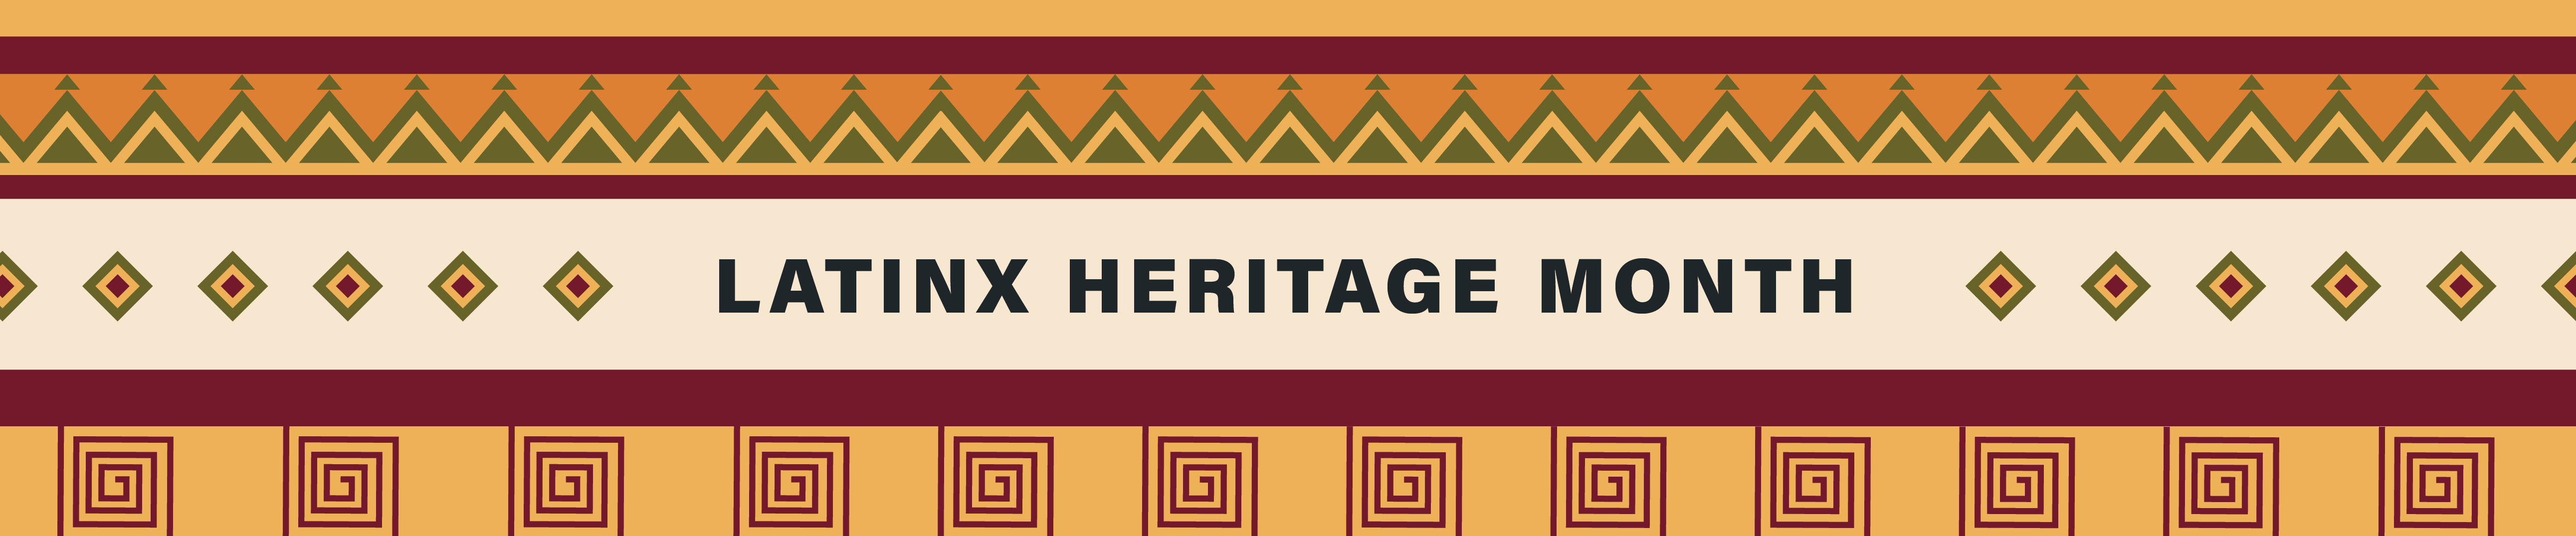 Latinx Heritage Month text with a yellow, red and green pattern of squares, triangles and other shapes.